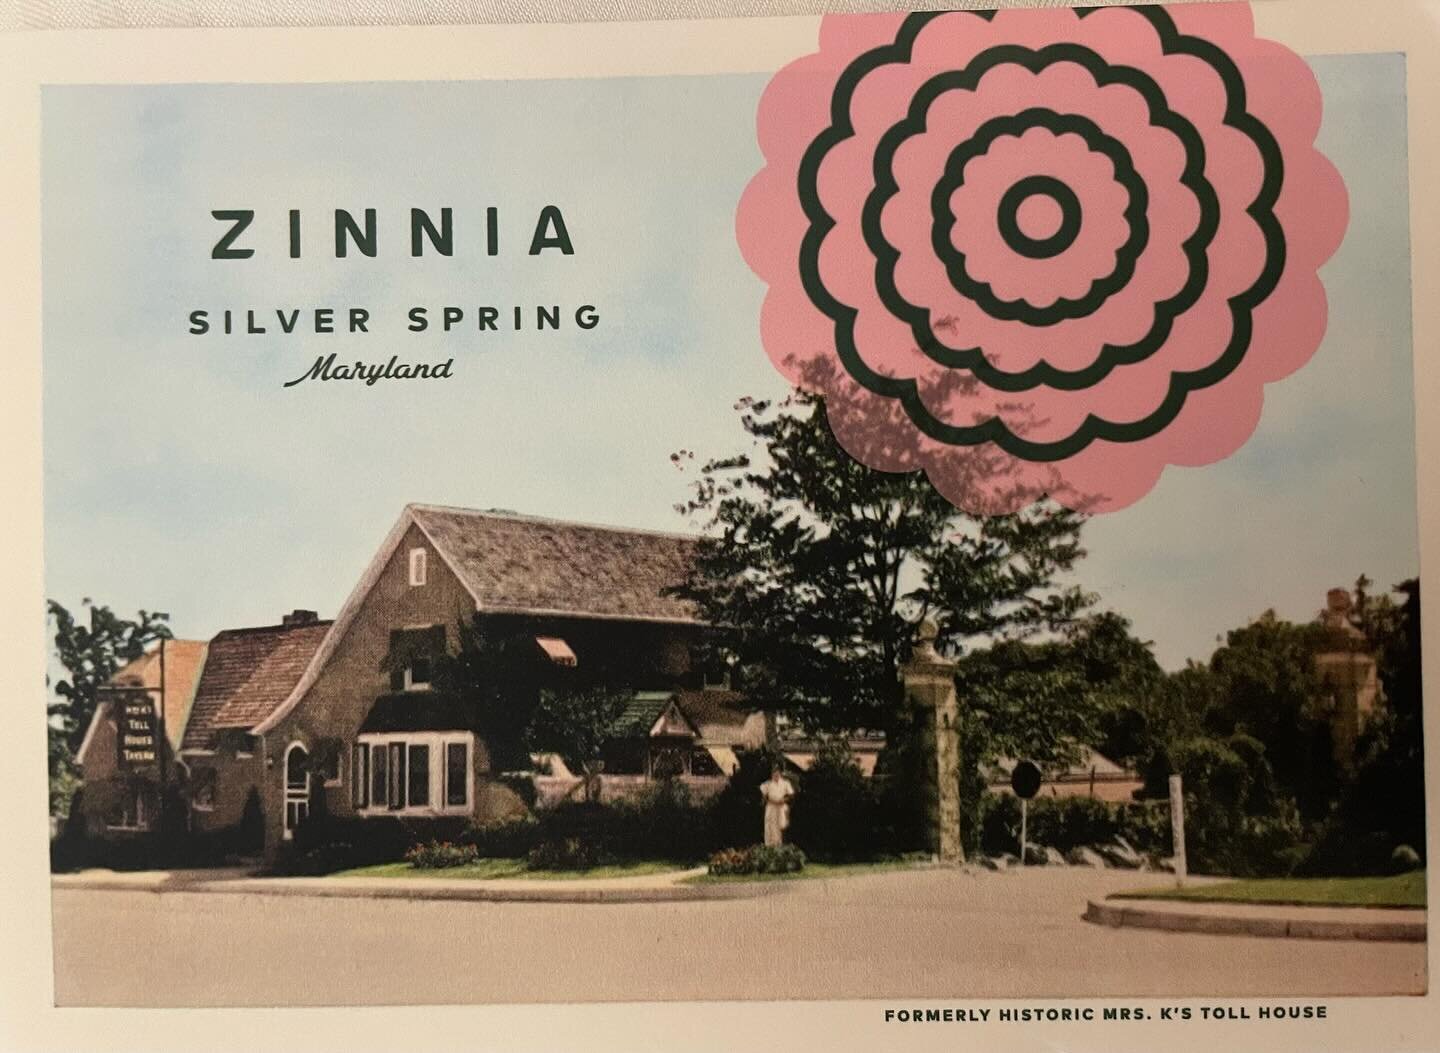 Road trip! GREAT meal @eatzinnia a magical transformation of an iconic Silver Spring, MD restaurant. So loving the food, forgot to take pix! Trust us on this. Get there! #greatfood #marylandeats #mdrestaurants #silverspringmd